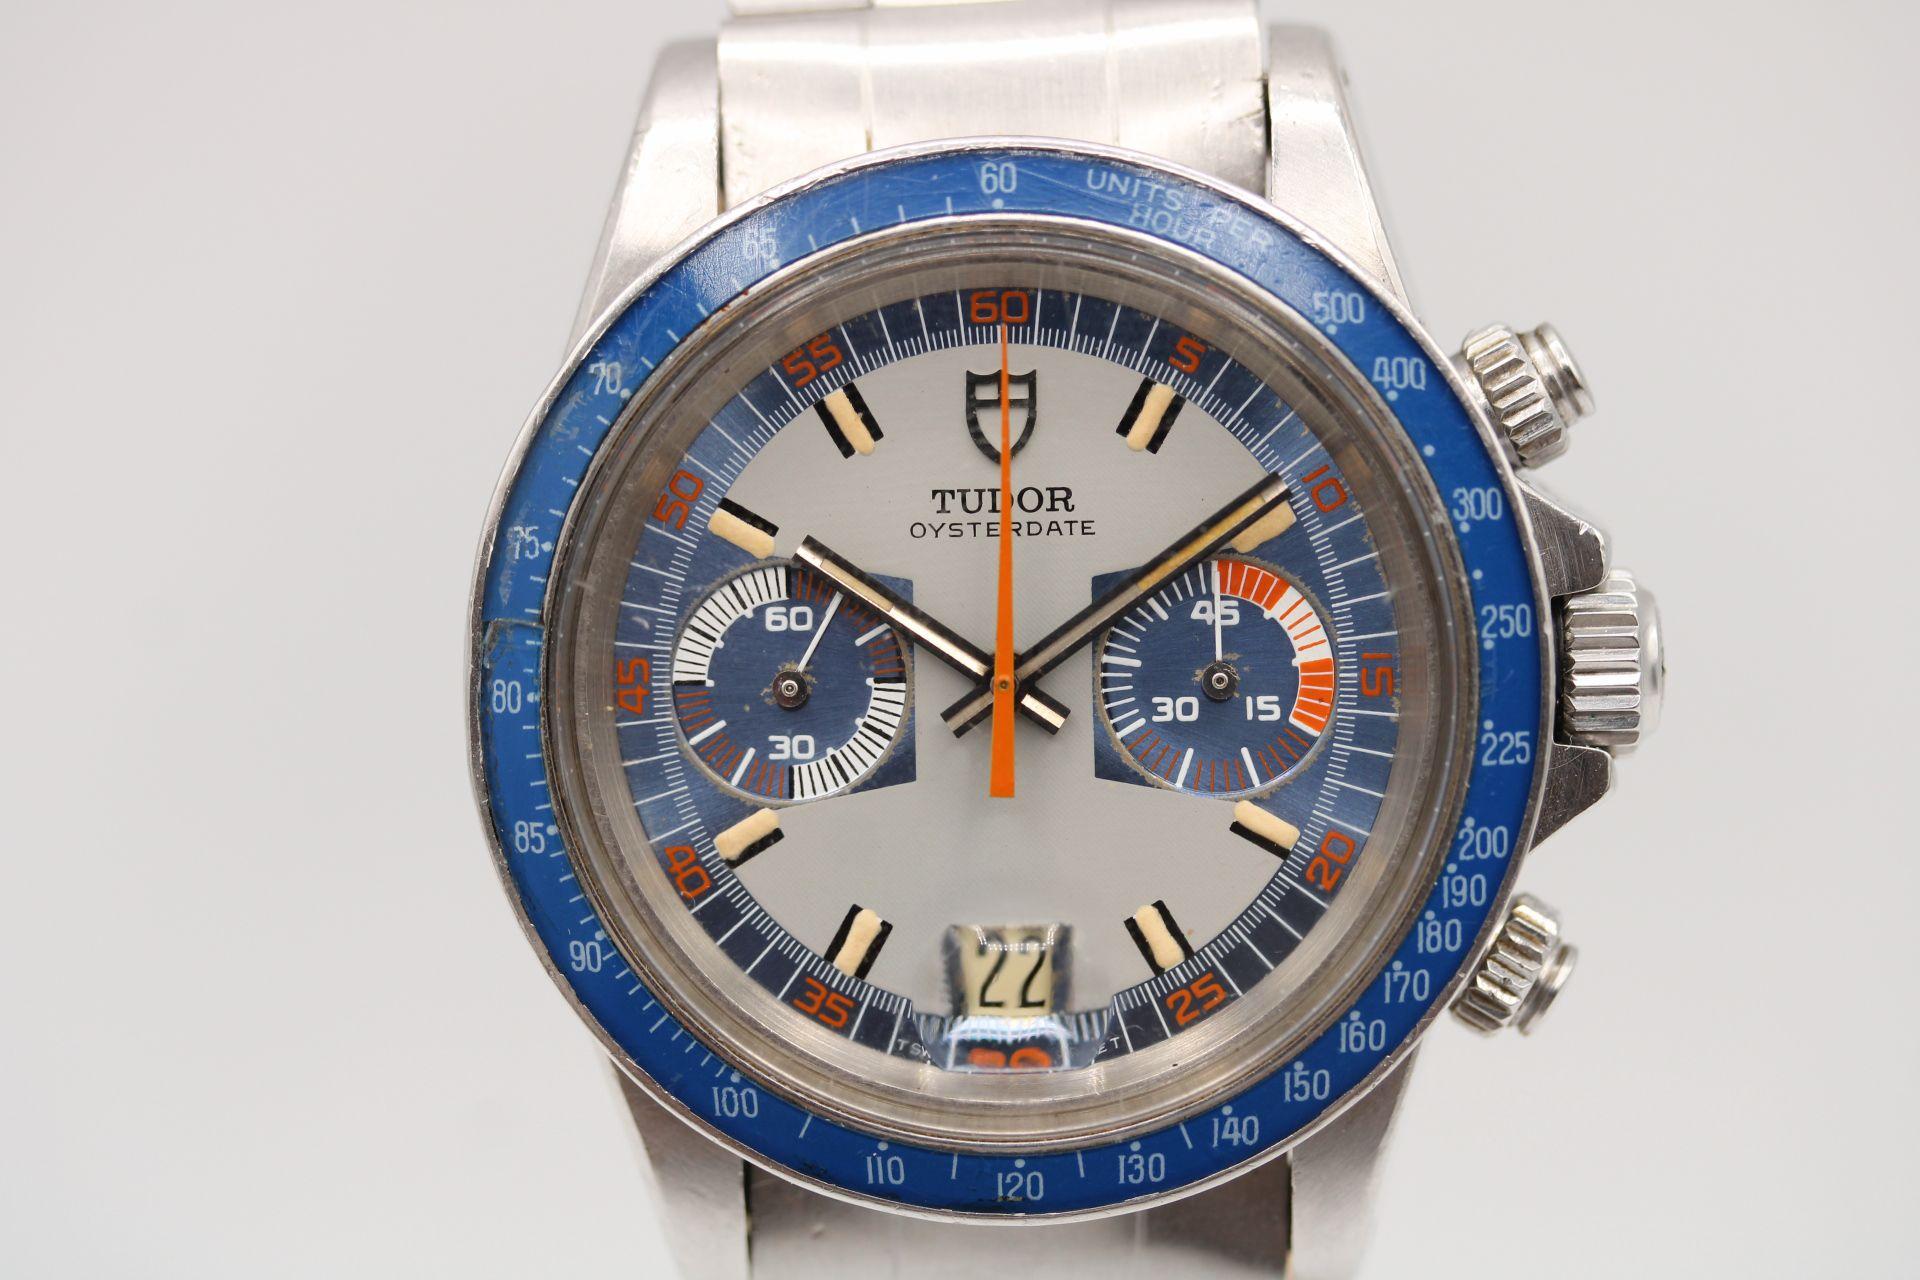 Tudor Montecarlo Carlo 7149/0 Watch and Papers 1977 For Sale 3